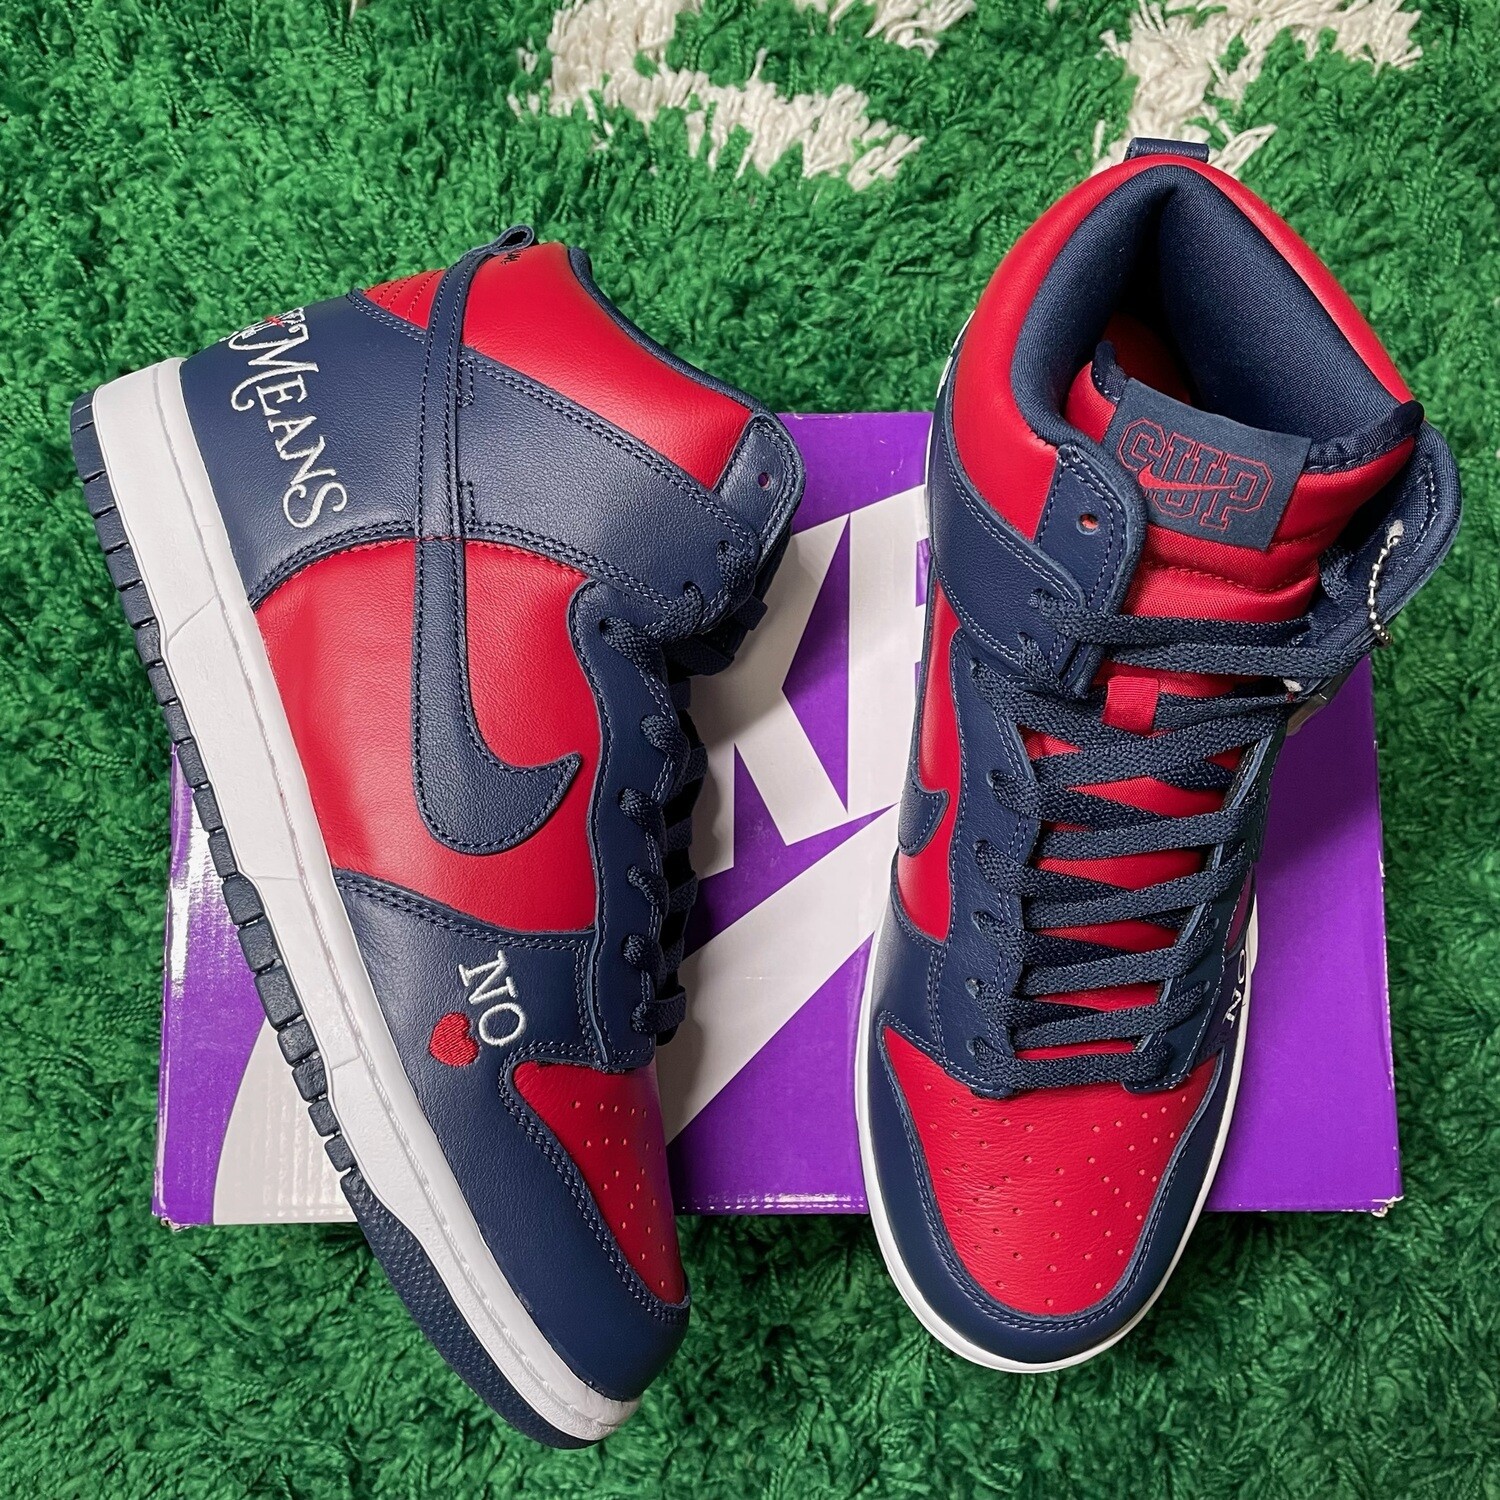 Nike SB Dunk High Supreme By Any Means Navy Size 10M/11.5W